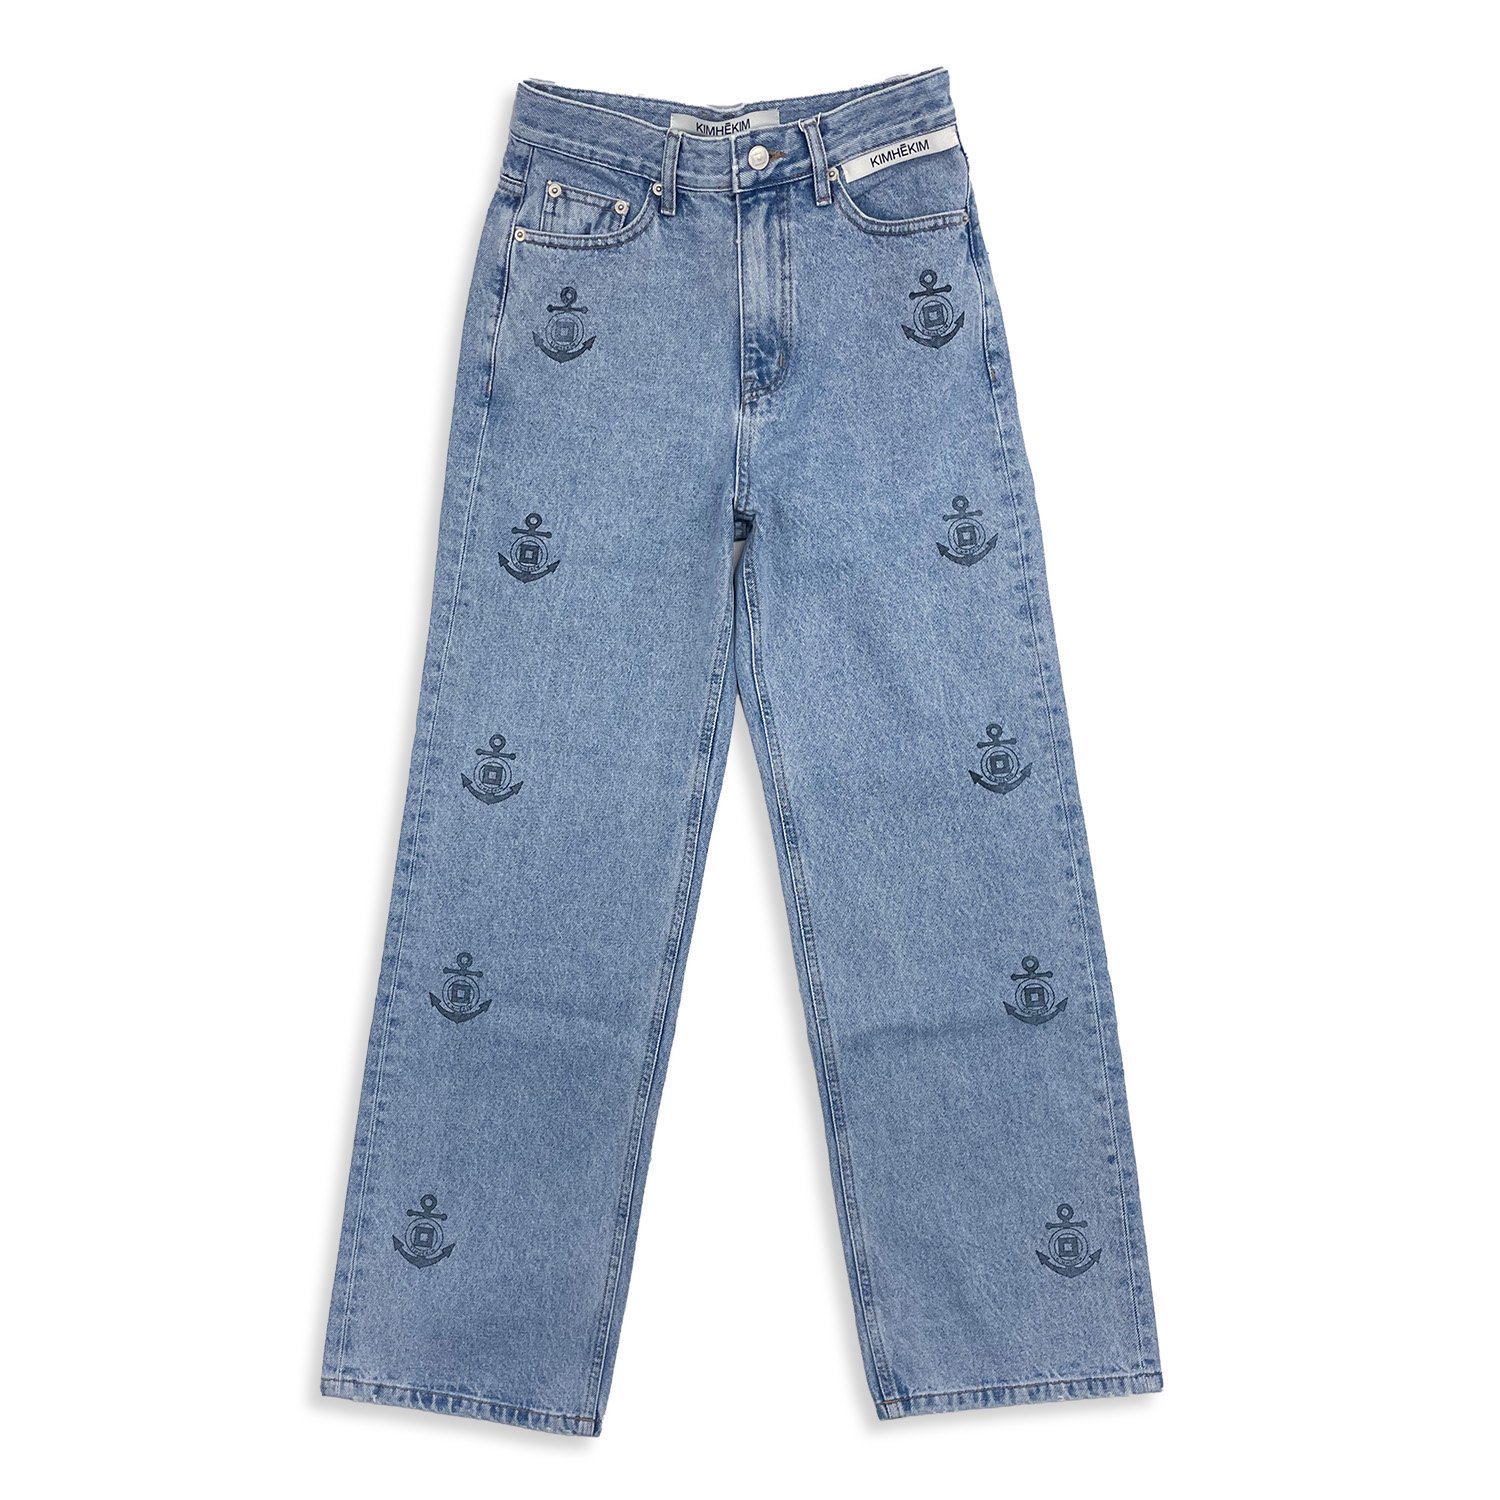 <img class='new_mark_img1' src='https://img.shop-pro.jp/img/new/icons7.gif' style='border:none;display:inline;margin:0px;padding:0px;width:auto;' />KIMHEKIM ANCHOR STAMPED JEANS